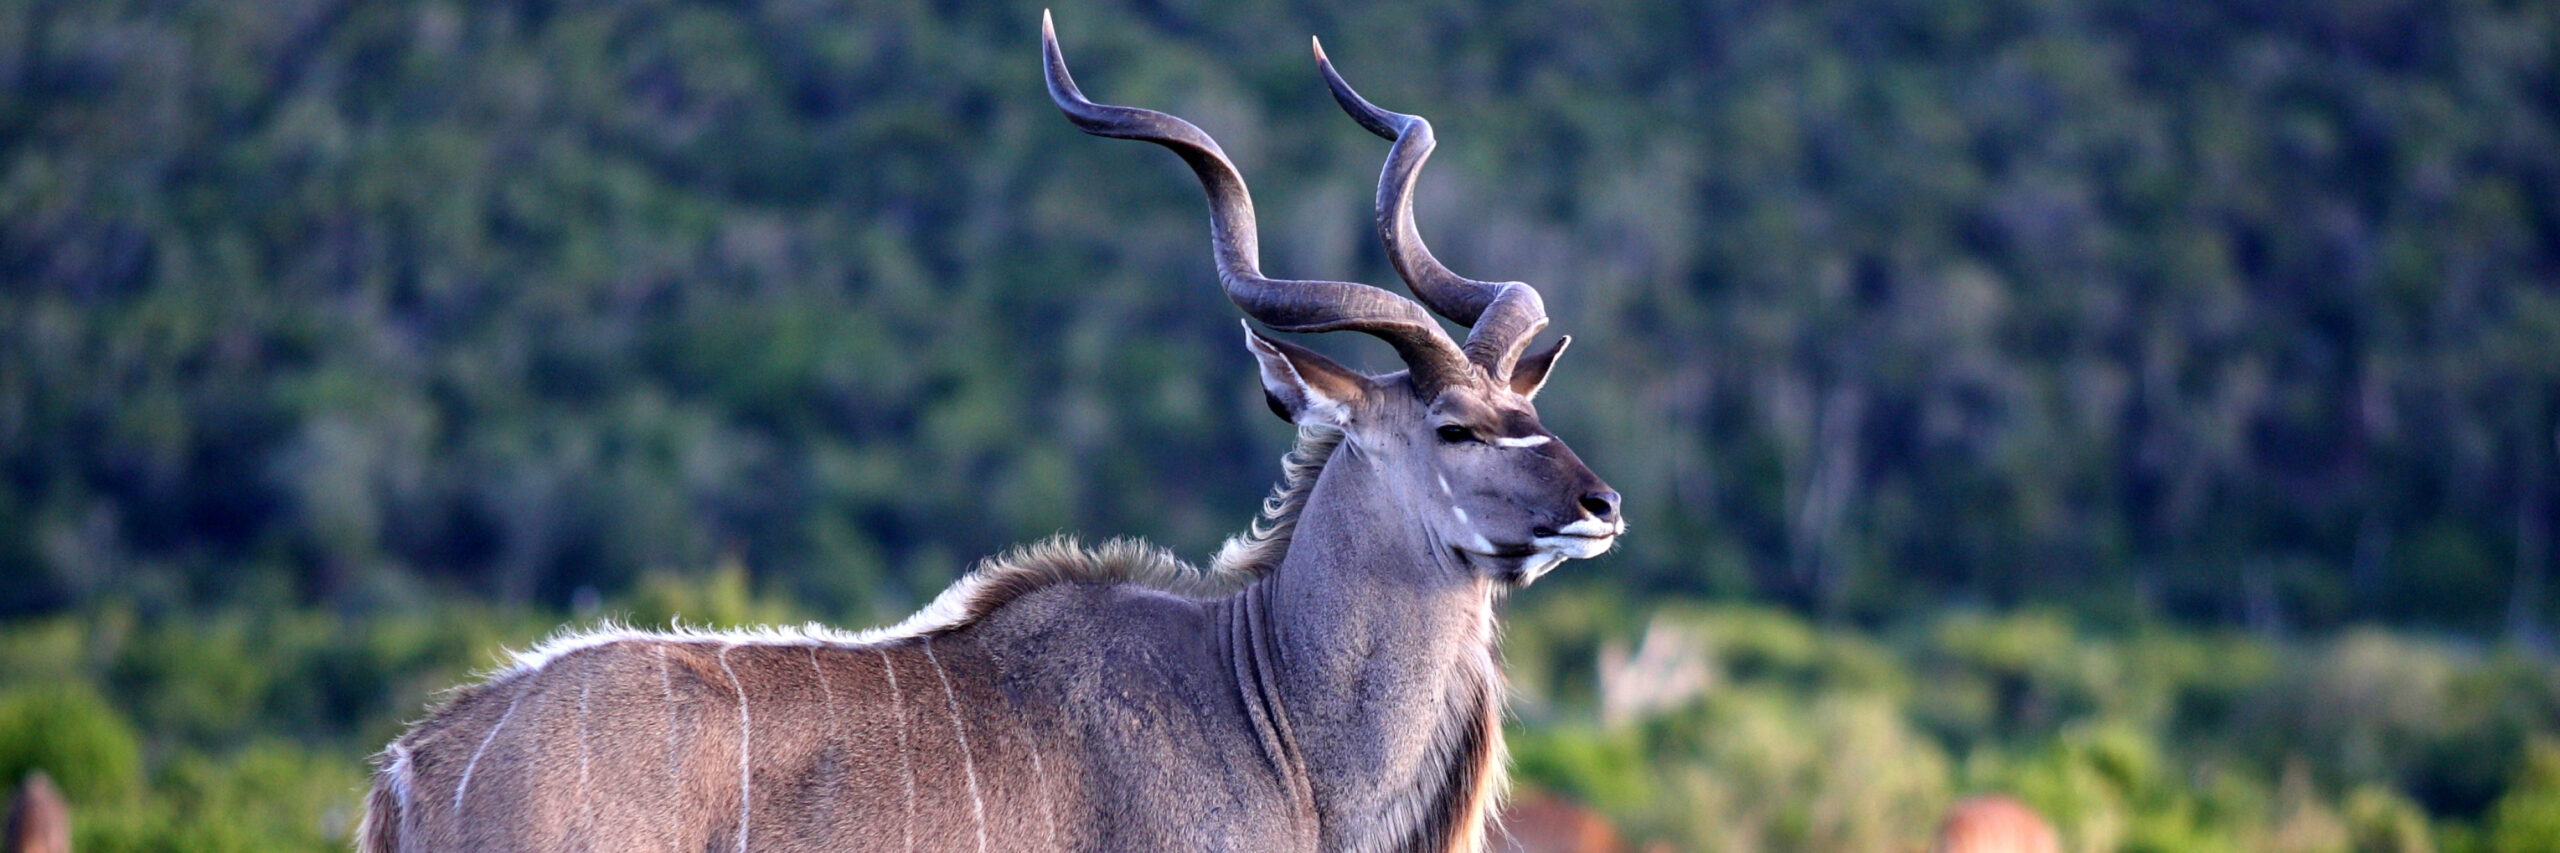 abyssinian-greater-kudu